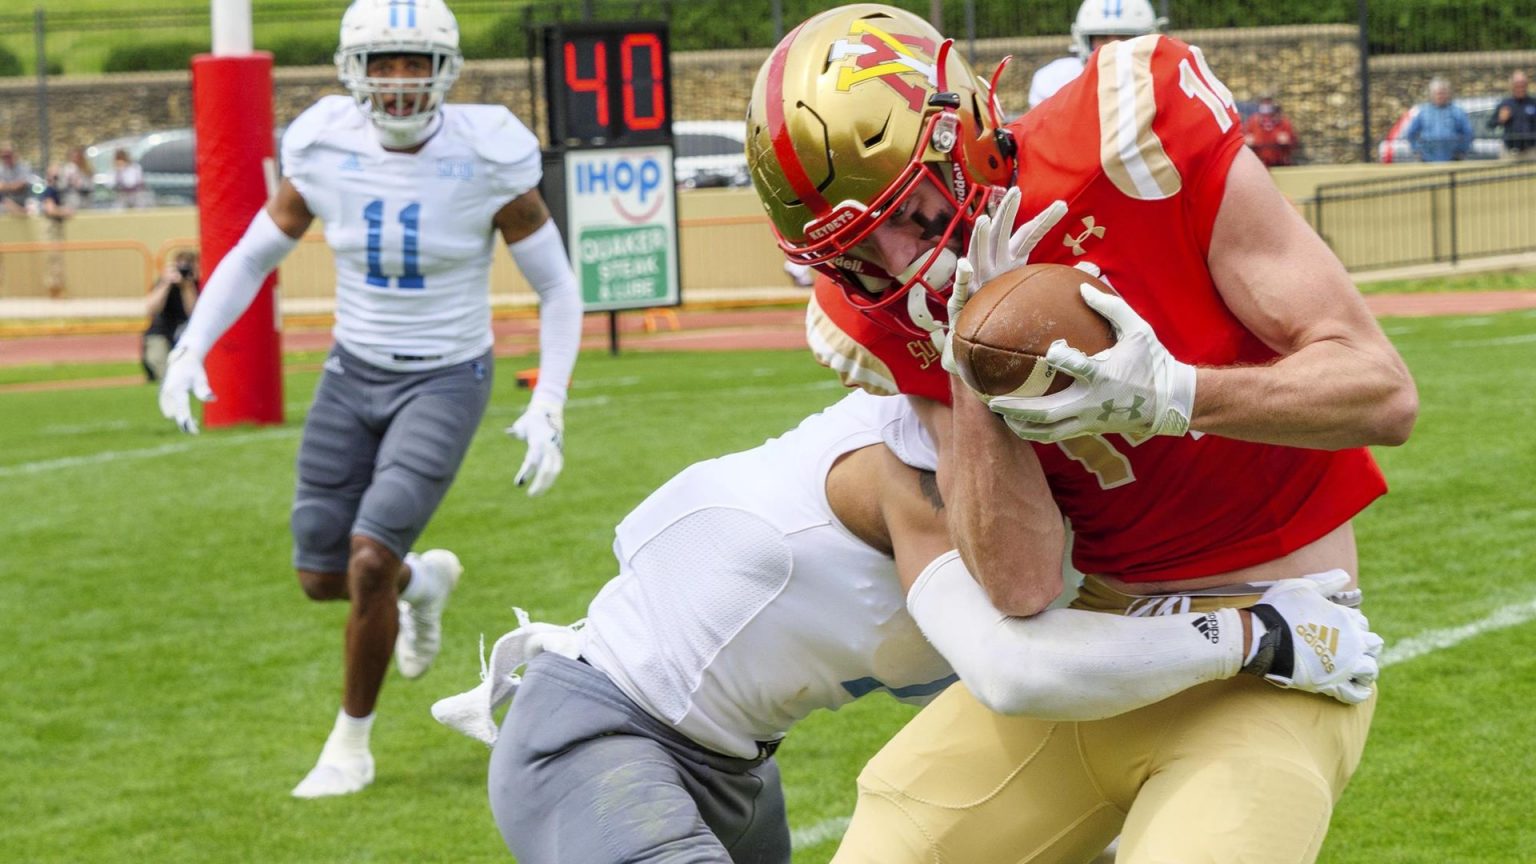 2021 Fcs Season Preview Vmi The College Sports Journal 3112